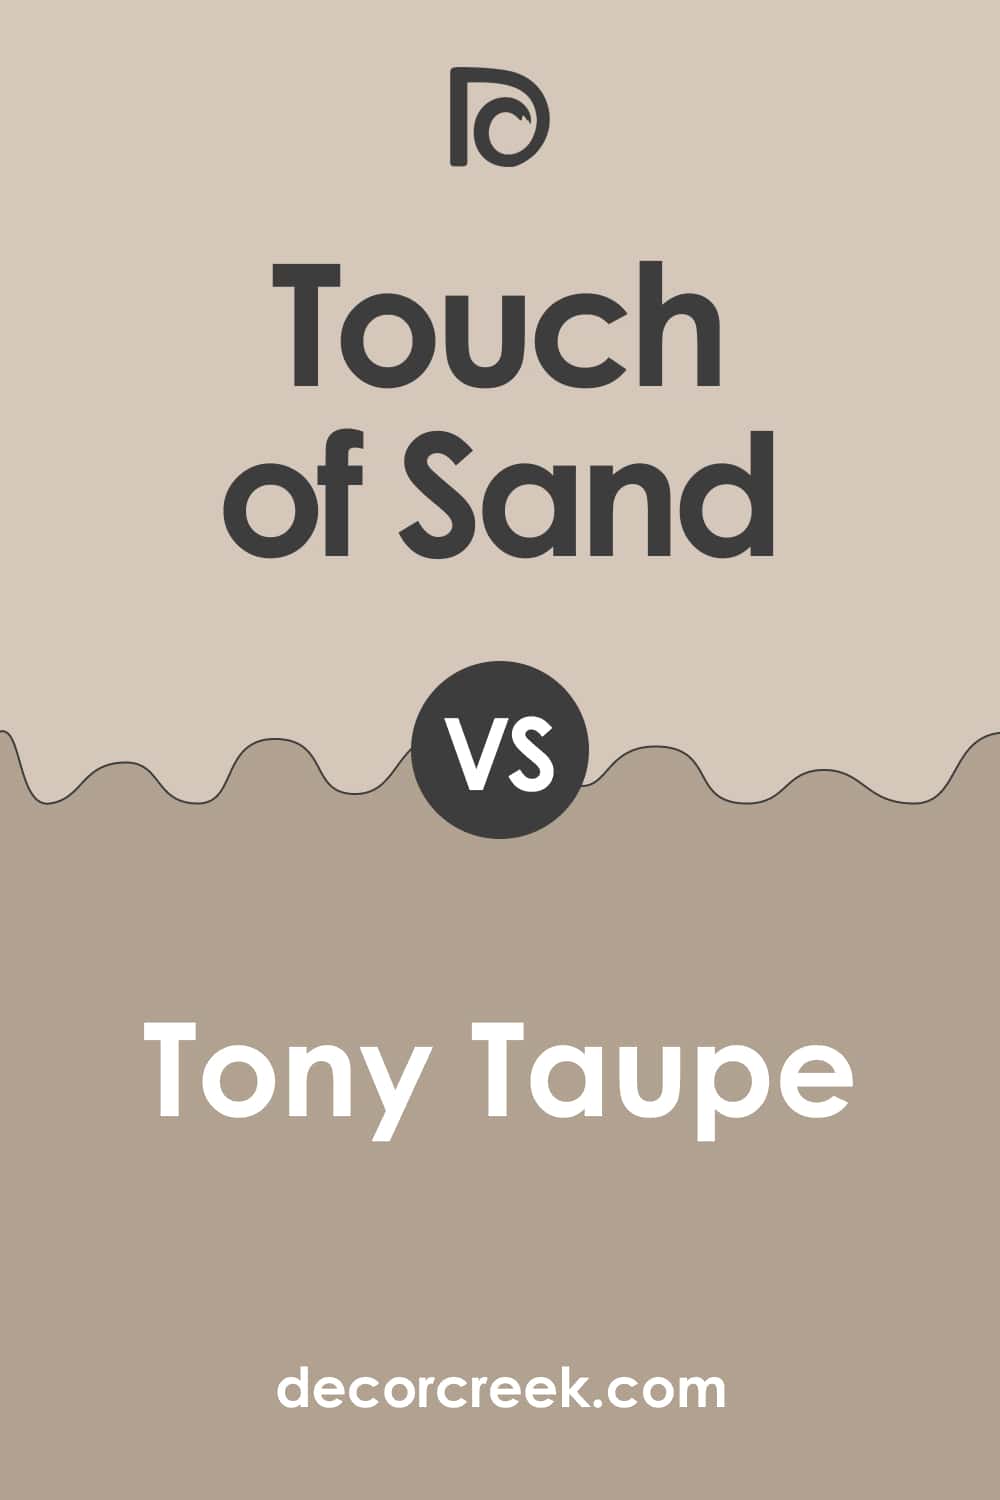 SW Touch of Sand vs Tony Taupe